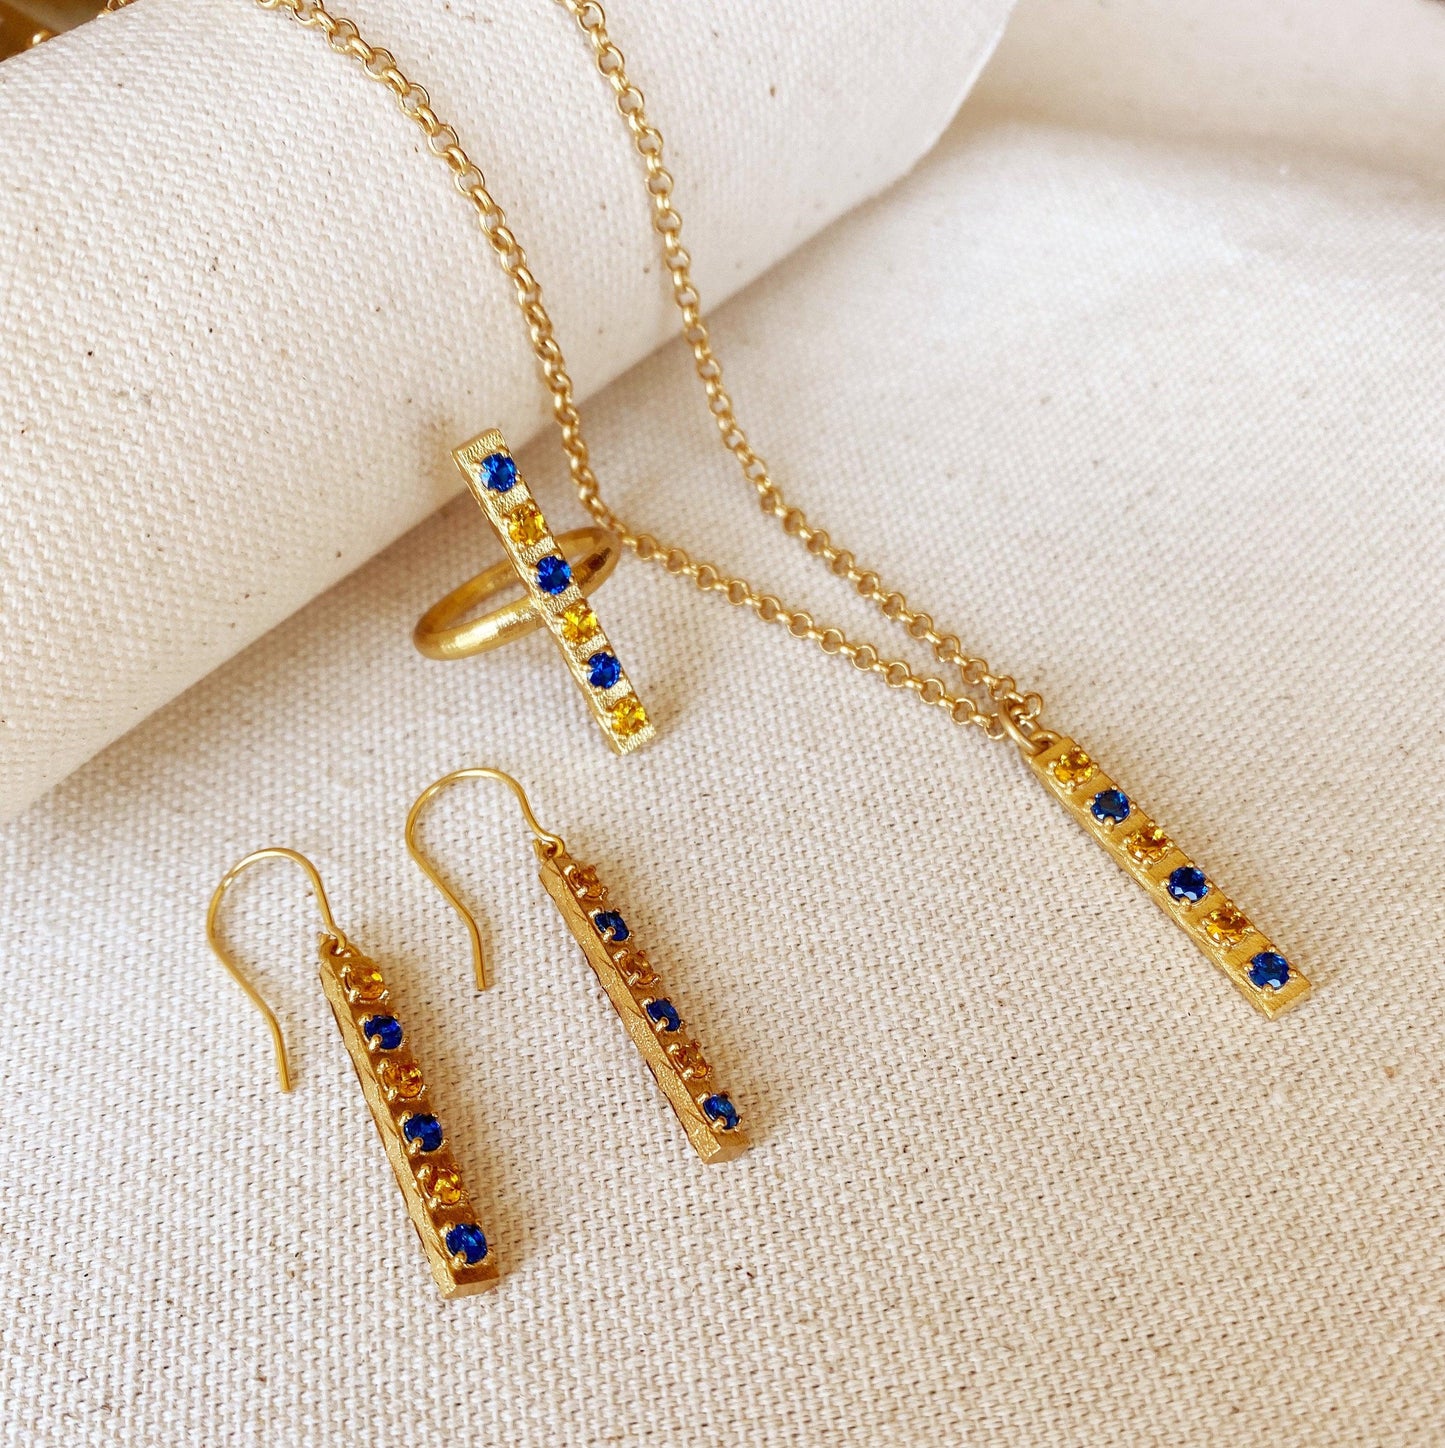 GoldFi 18k Gold Filled Delicate Bar Sapphire And Topaz Cubic Zirconia Set